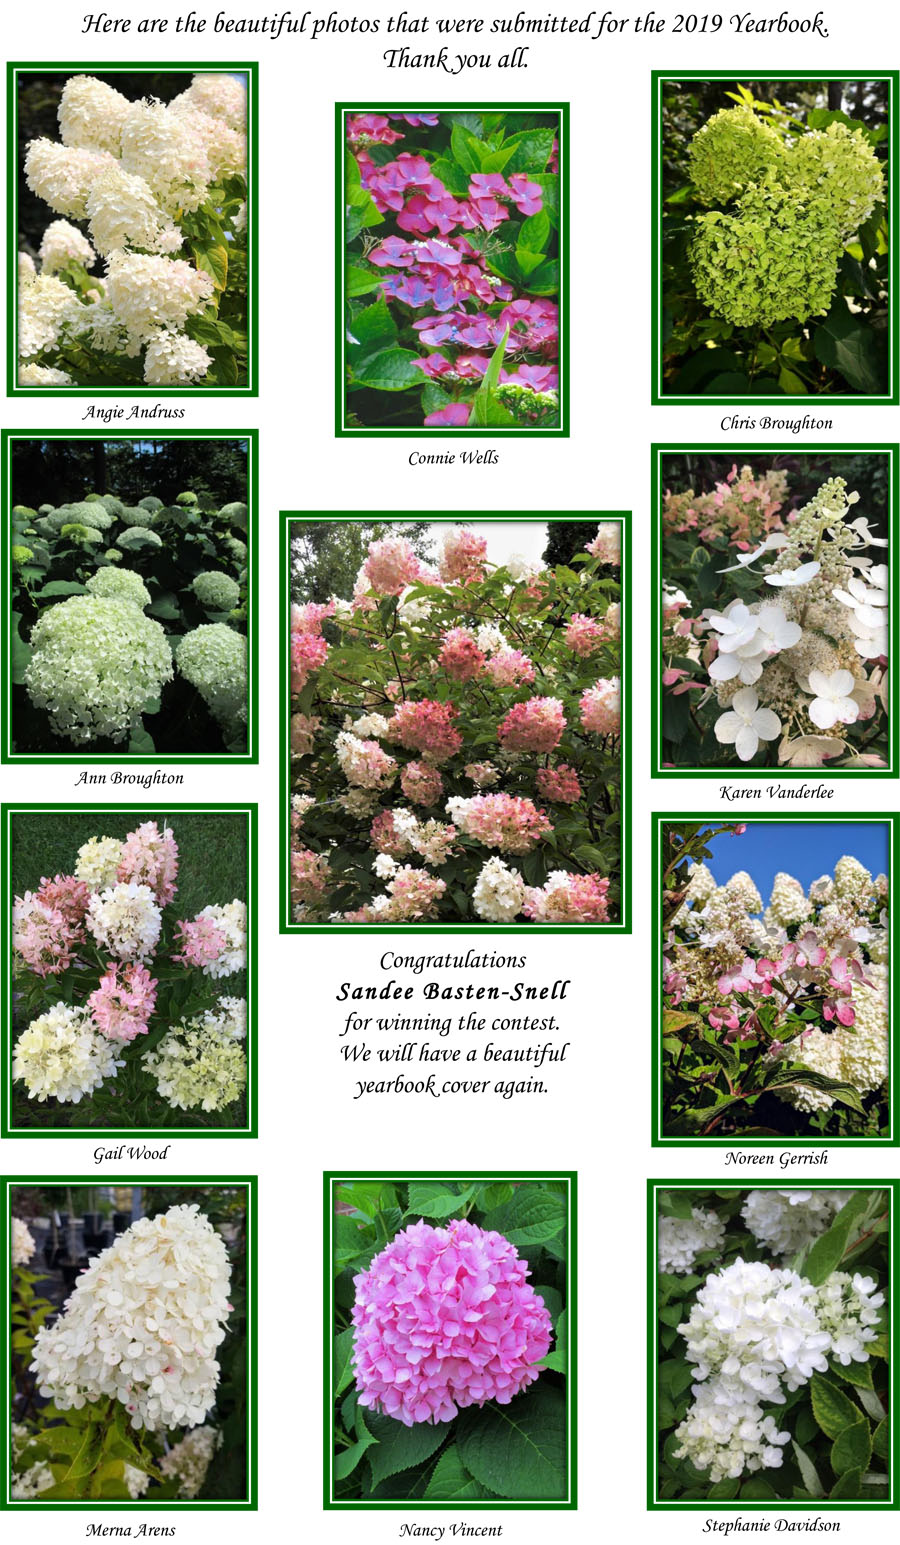 Uxbridge Horticultural Society 2019 Yearbook Cover Entries